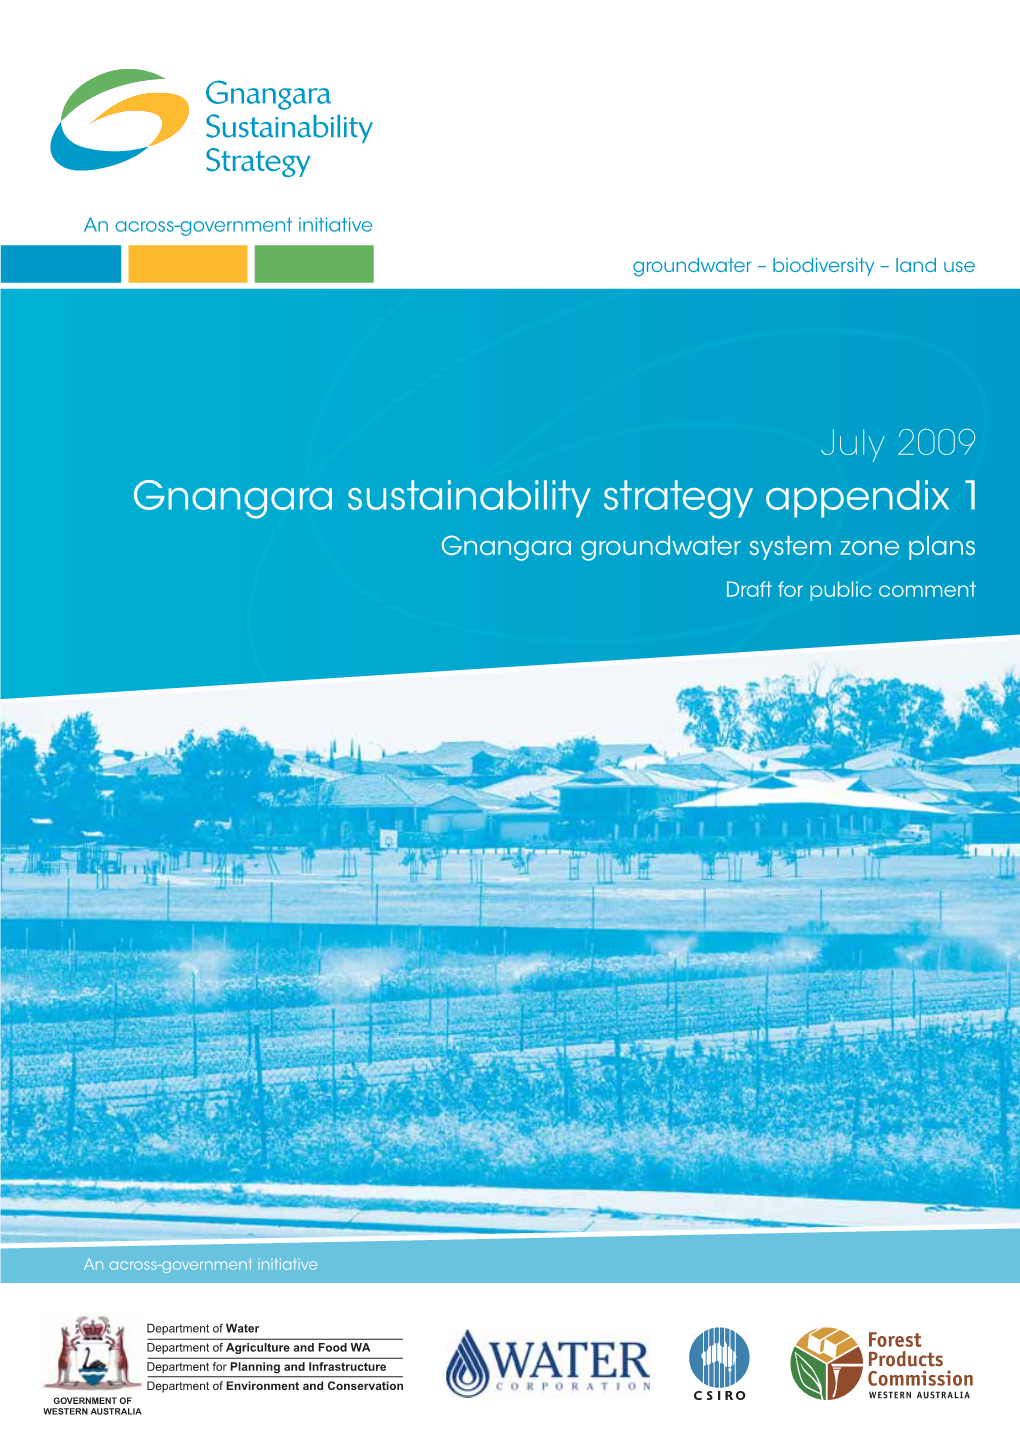 Gnangara Sustainability Strategy Appendix 1 Gnangara Groundwater System Zone Plans Draft for Public Comment